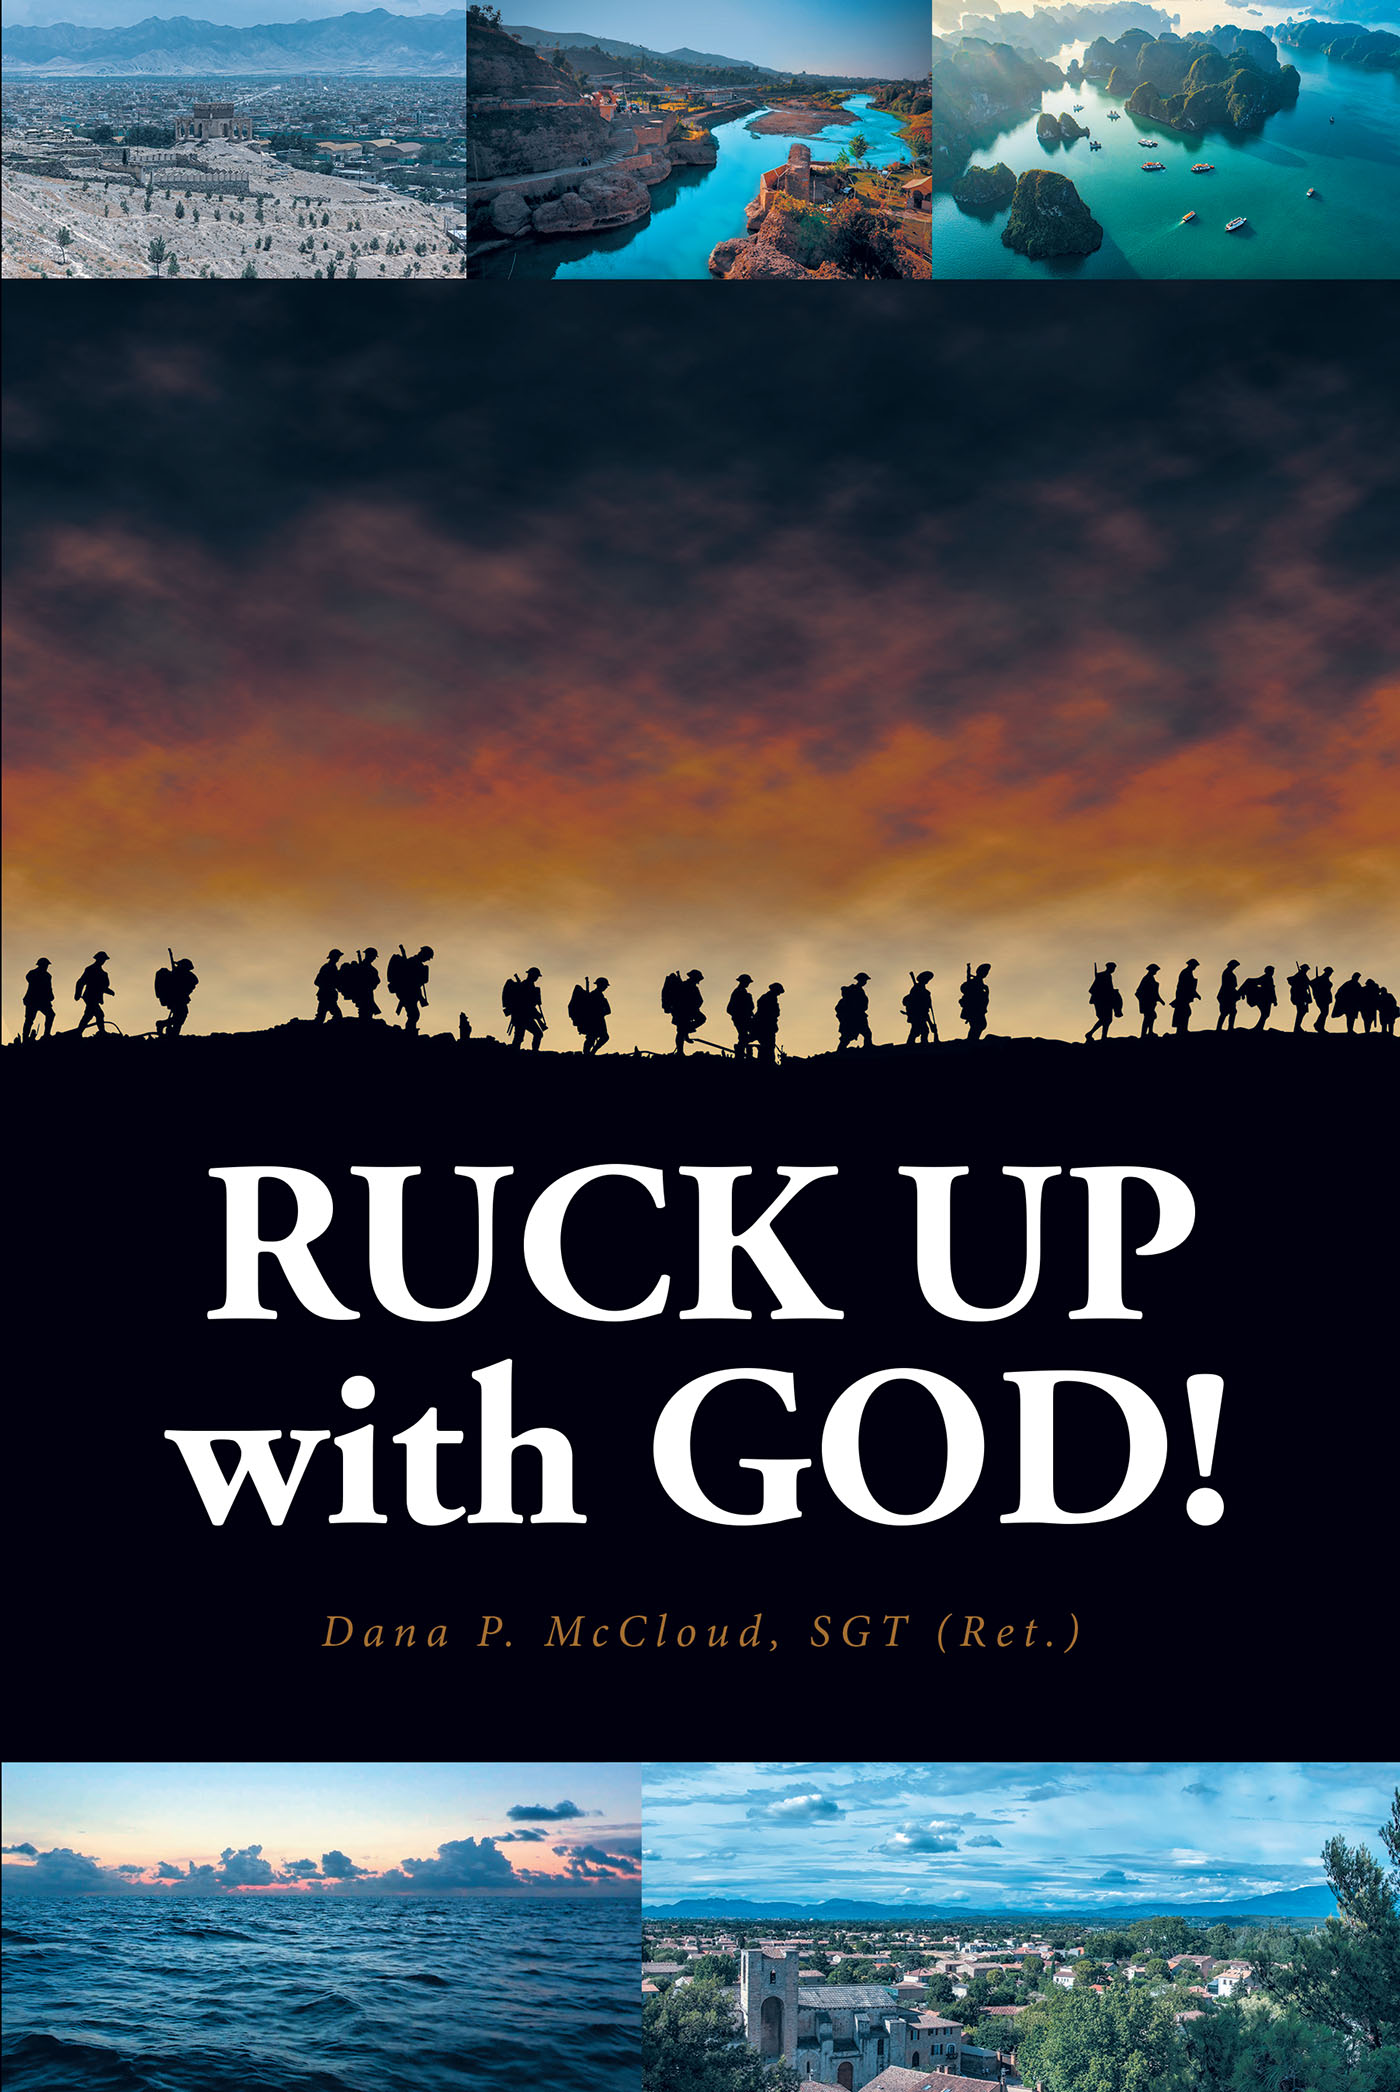 Author Dana P. McCloud’s New Book, "Ruck Up with God!" Serves as a Reminder That All People Carry Heavy Loads on Their Backs, But They do Not Need to do so Alone